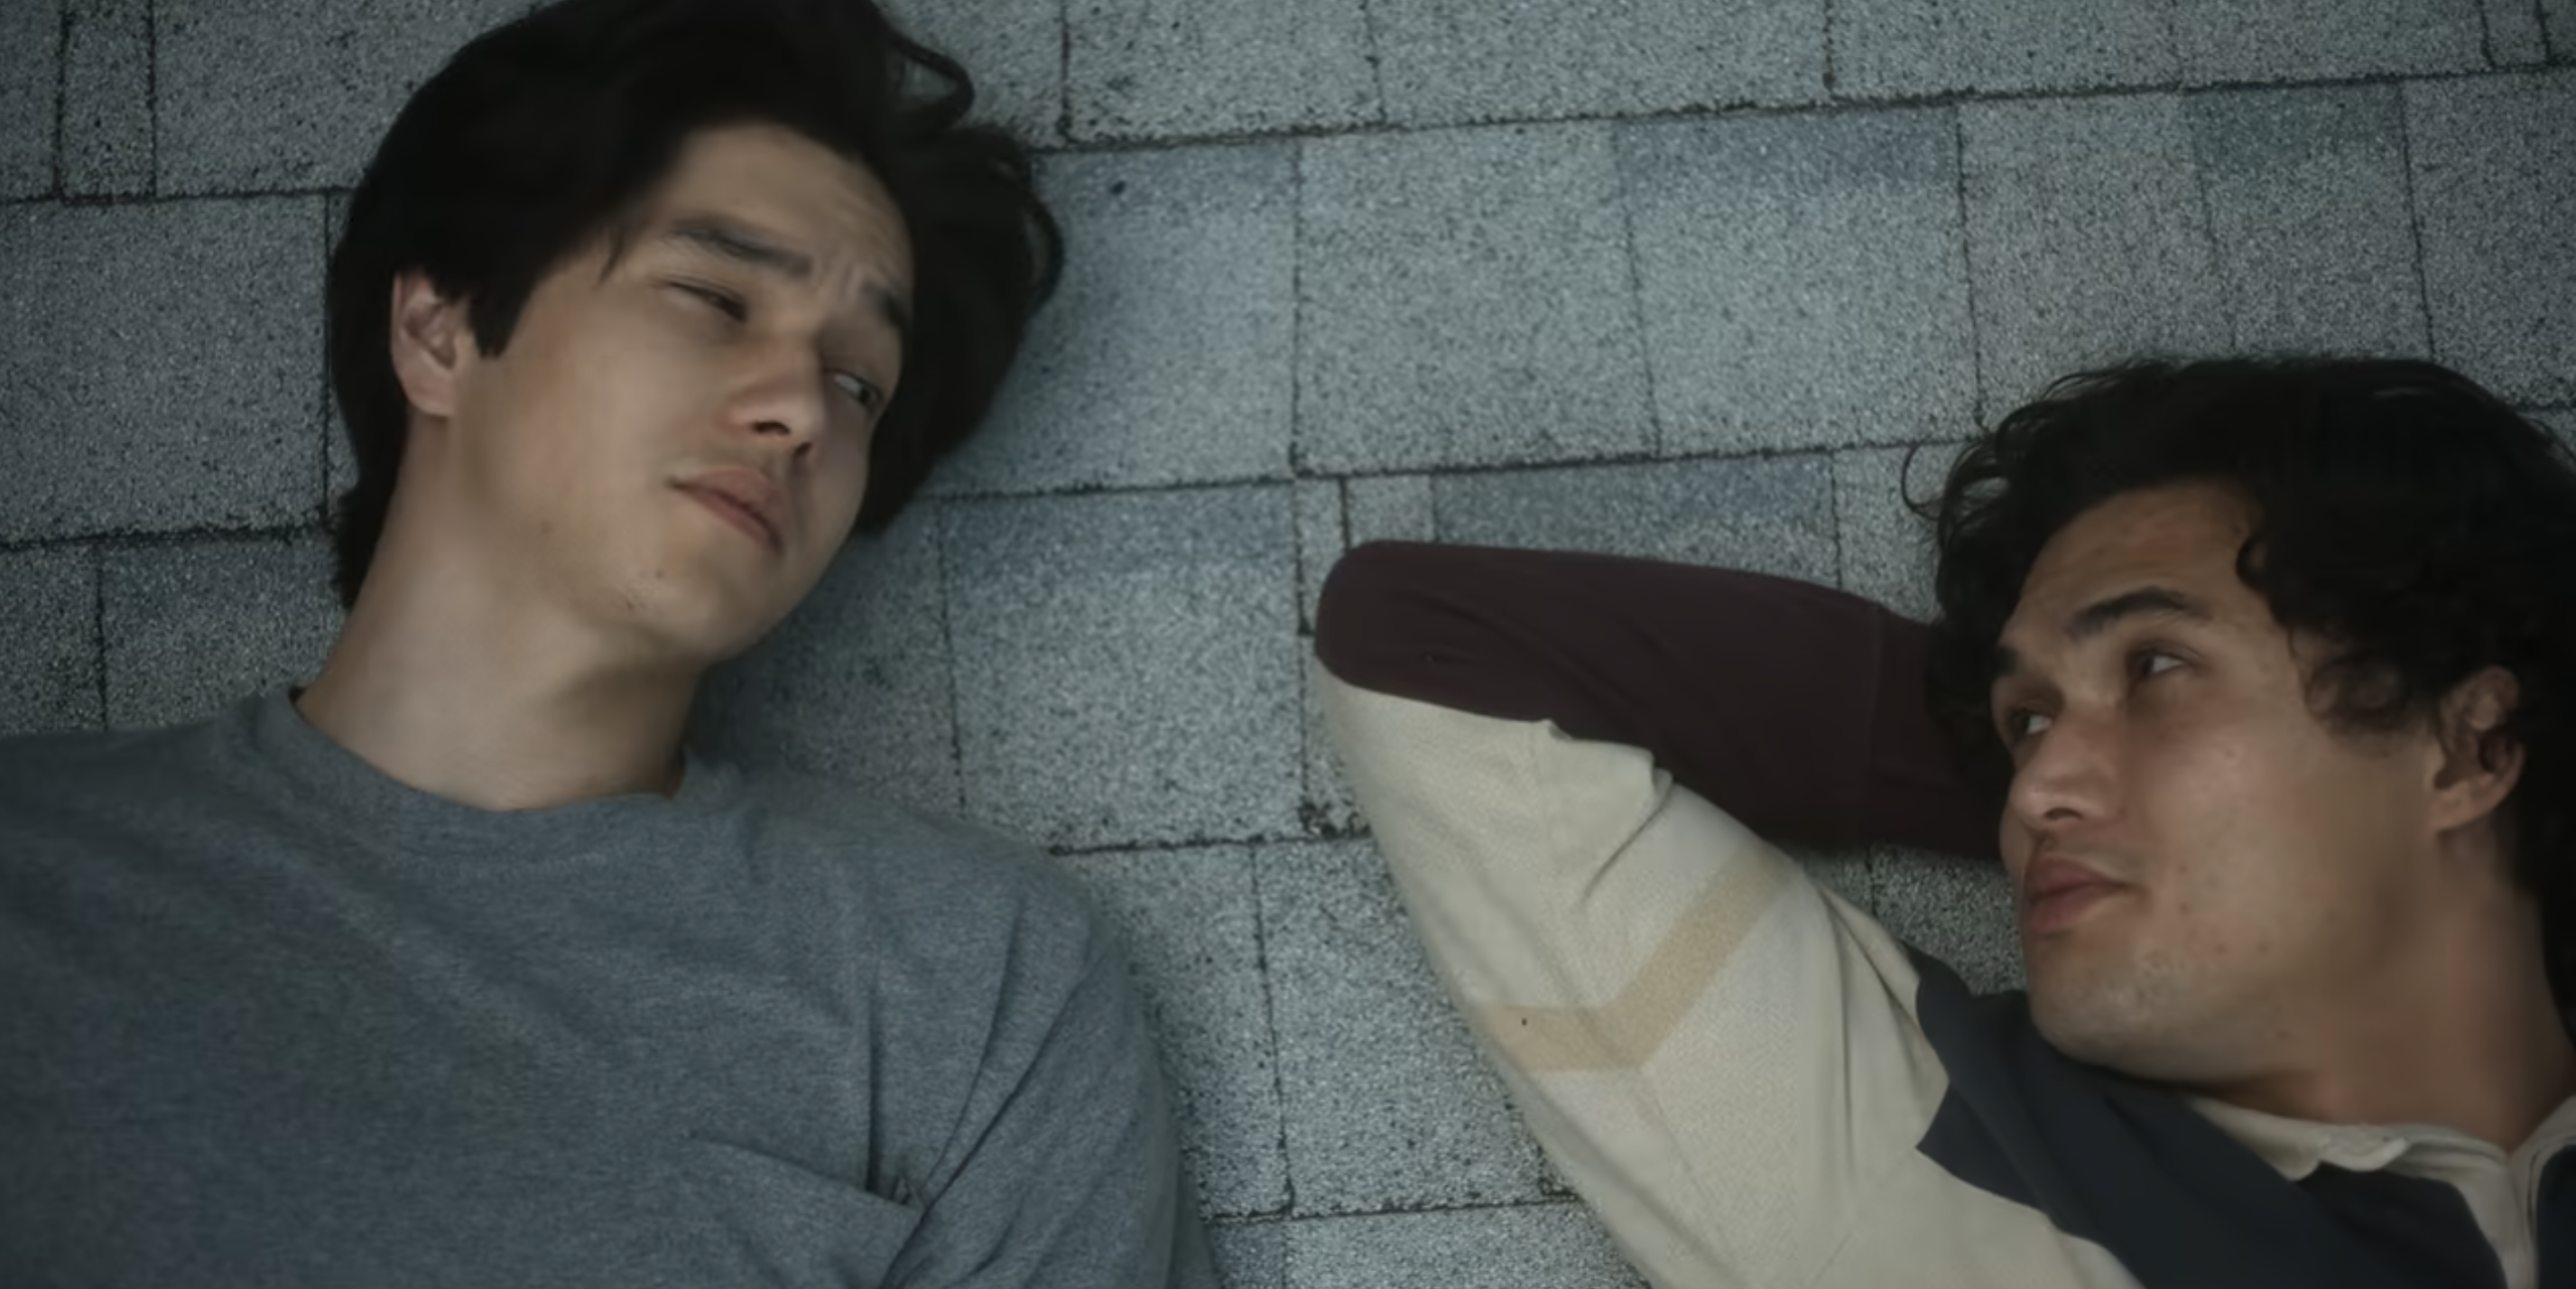 Joe and his son lying on the roof from &quot;May December&quot;